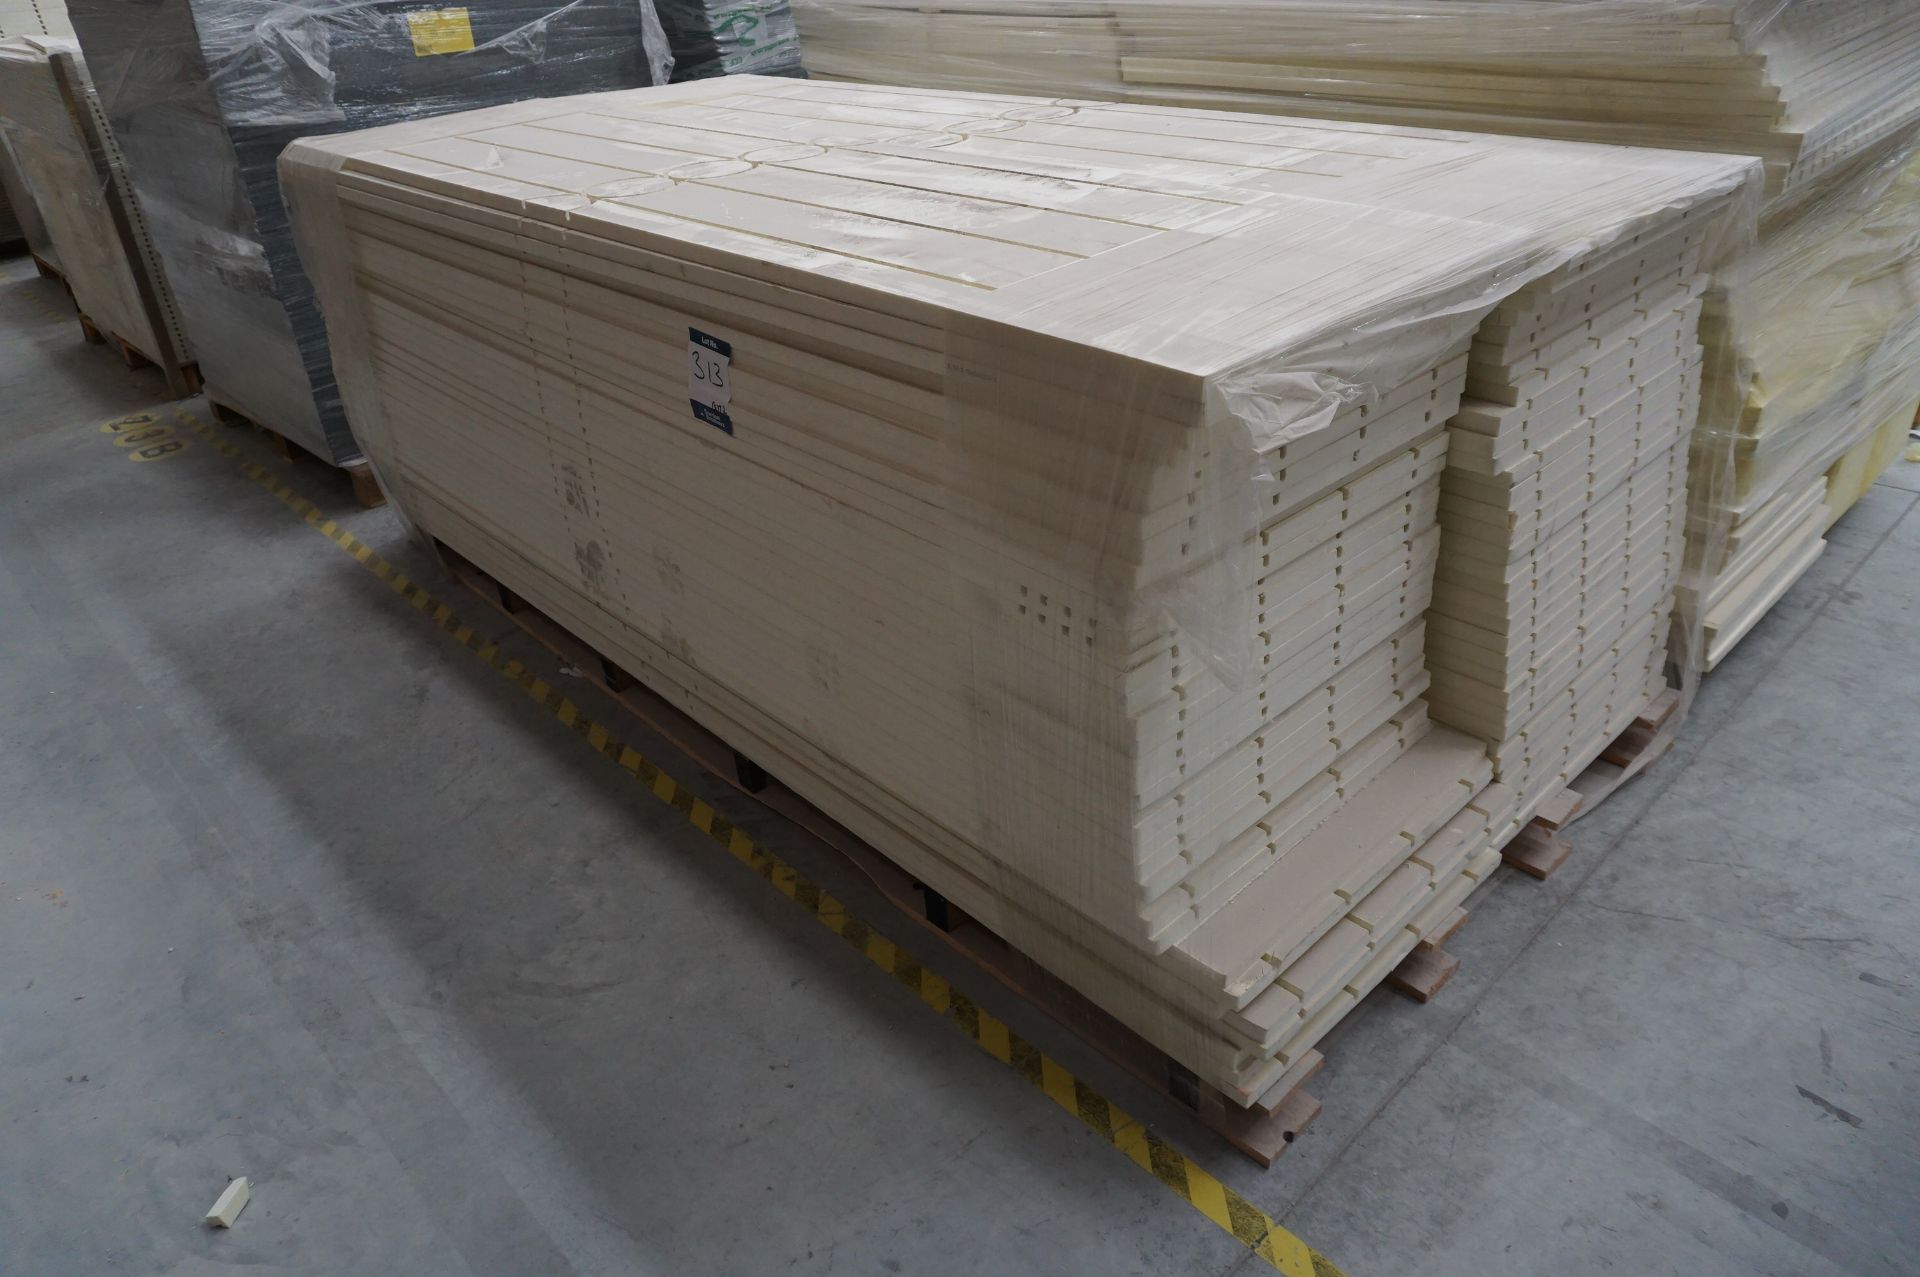 Quiet, Step T4 floor insulation on two pallets, approx. 700 sheets, 1190 x 593mm